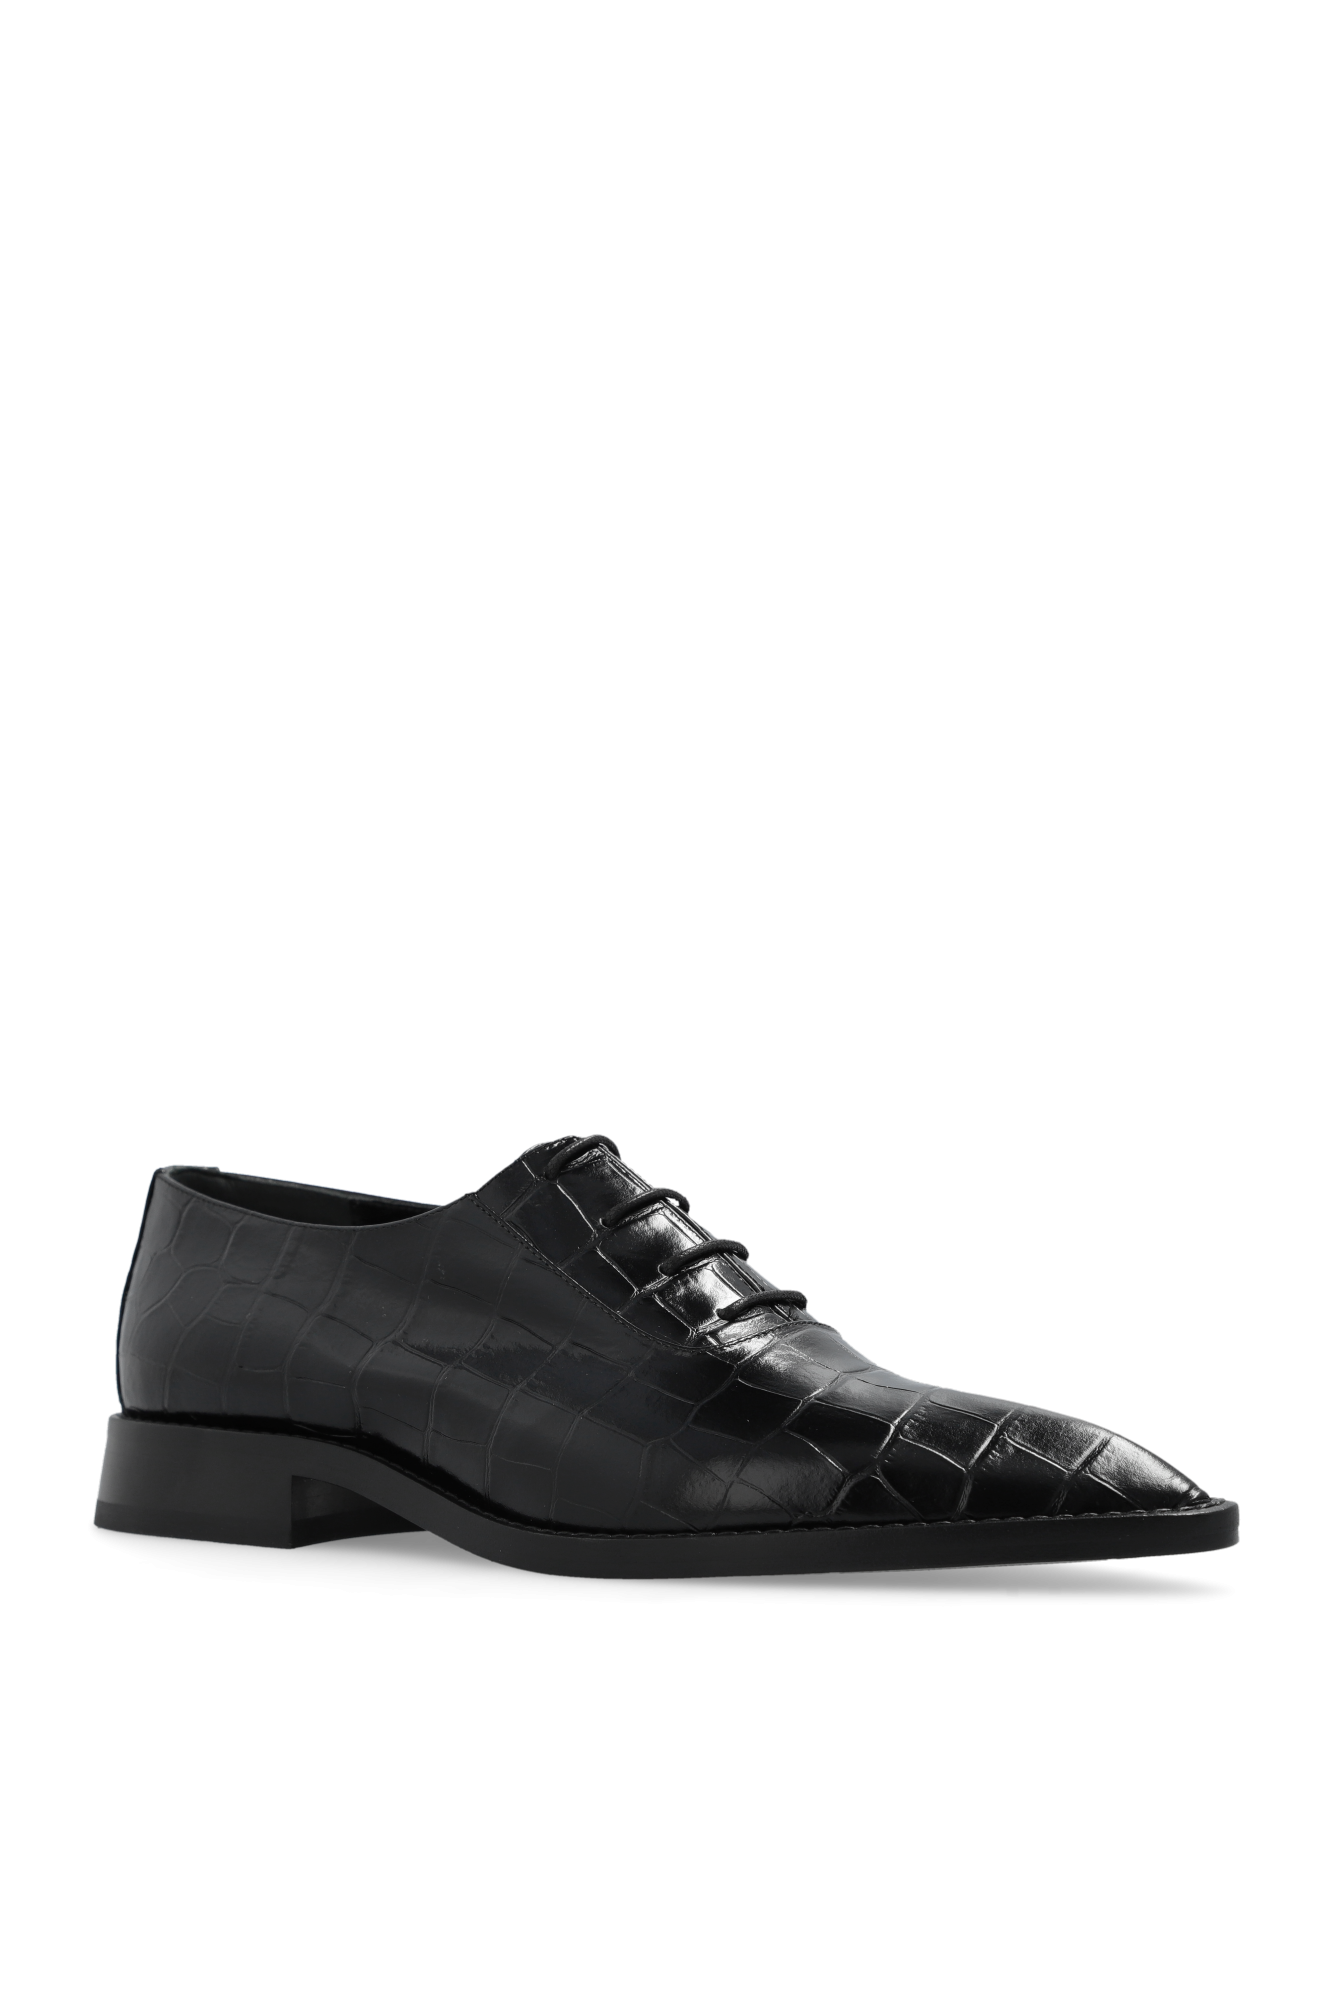 Victoria Beckham Leather Derby shoes